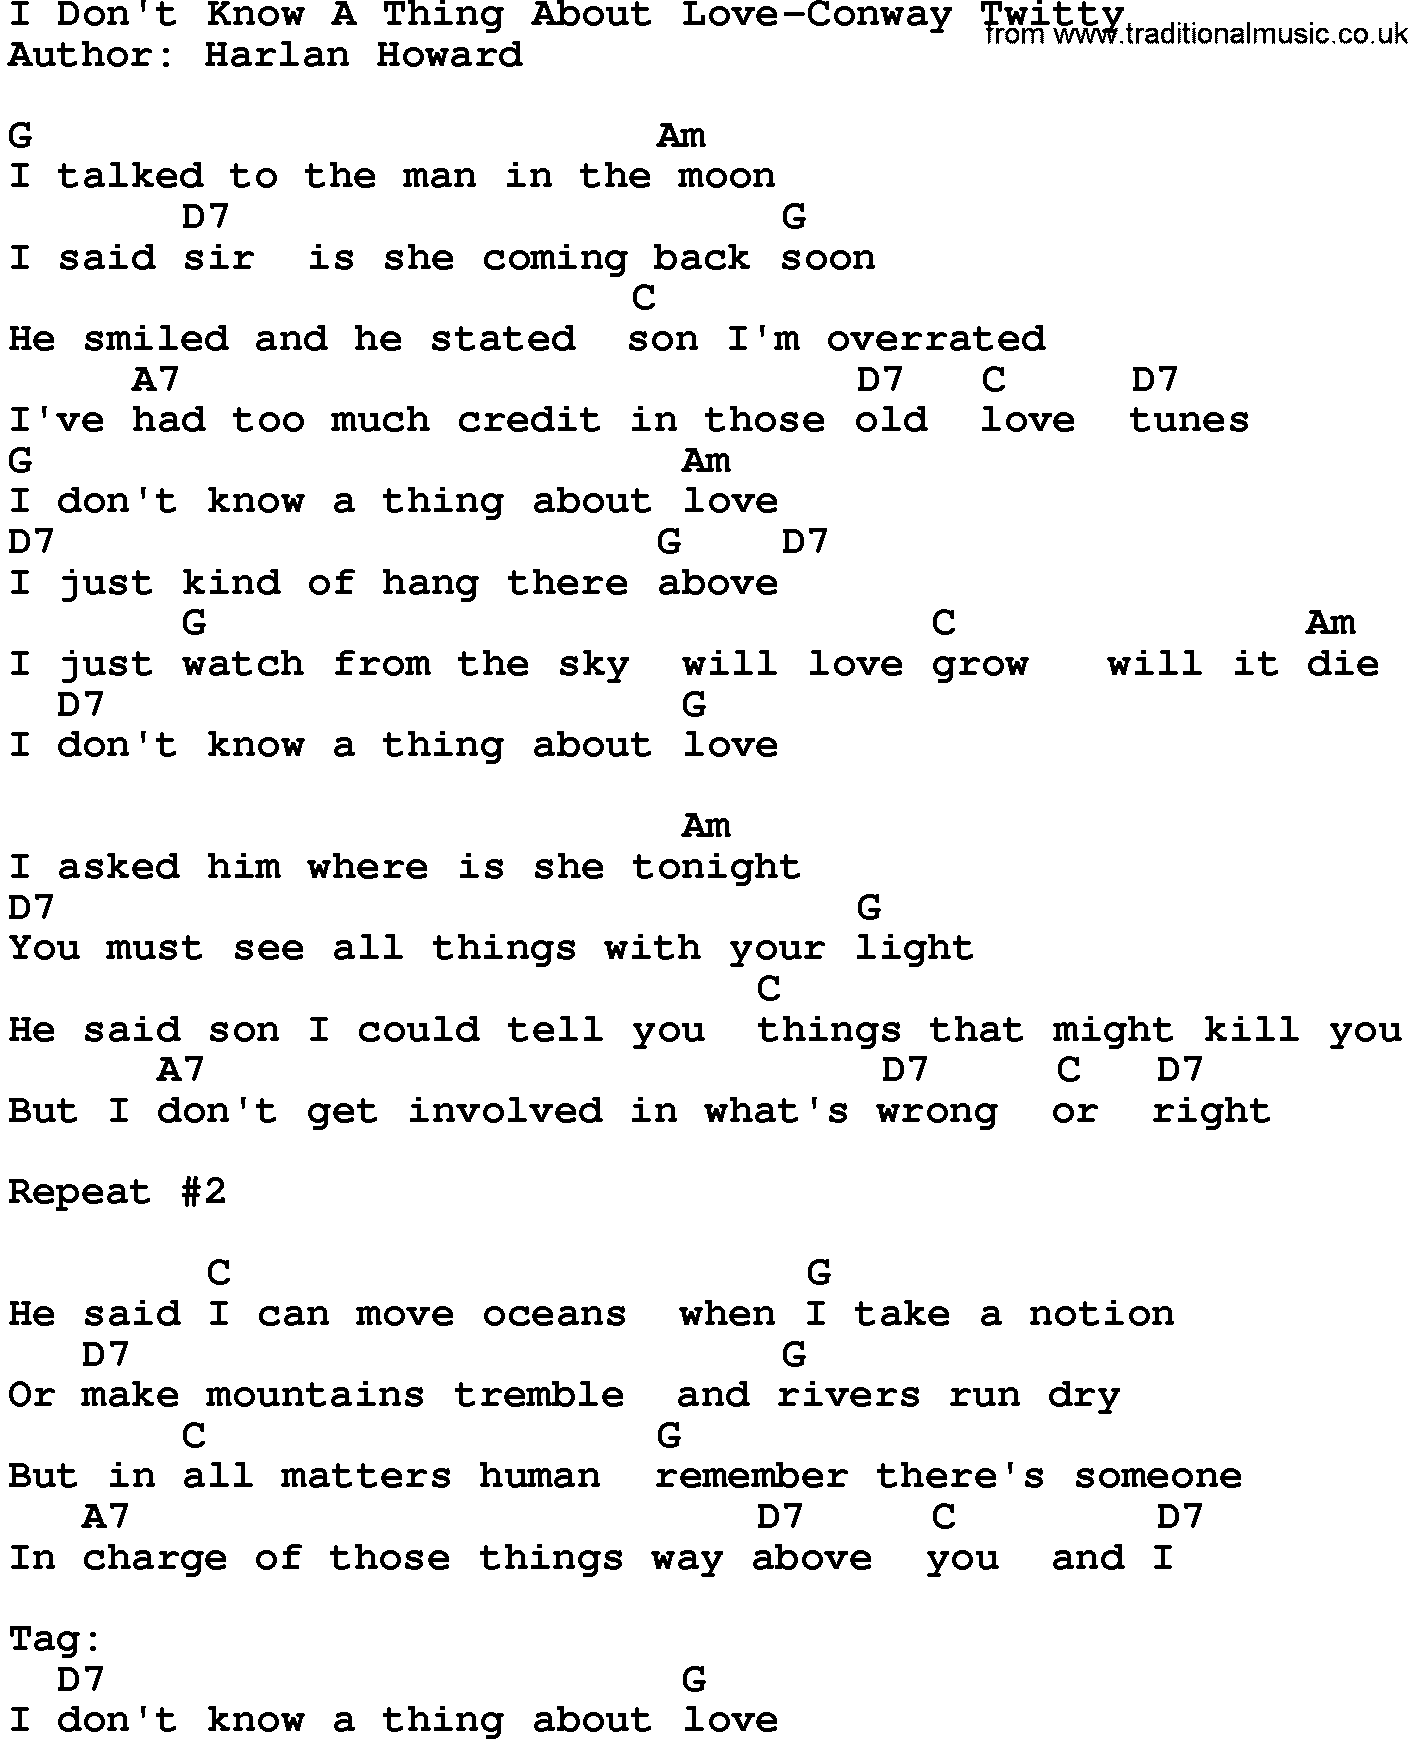 Country music song: I Don't Know A Thing About Love-Conway Twitty lyrics and chords